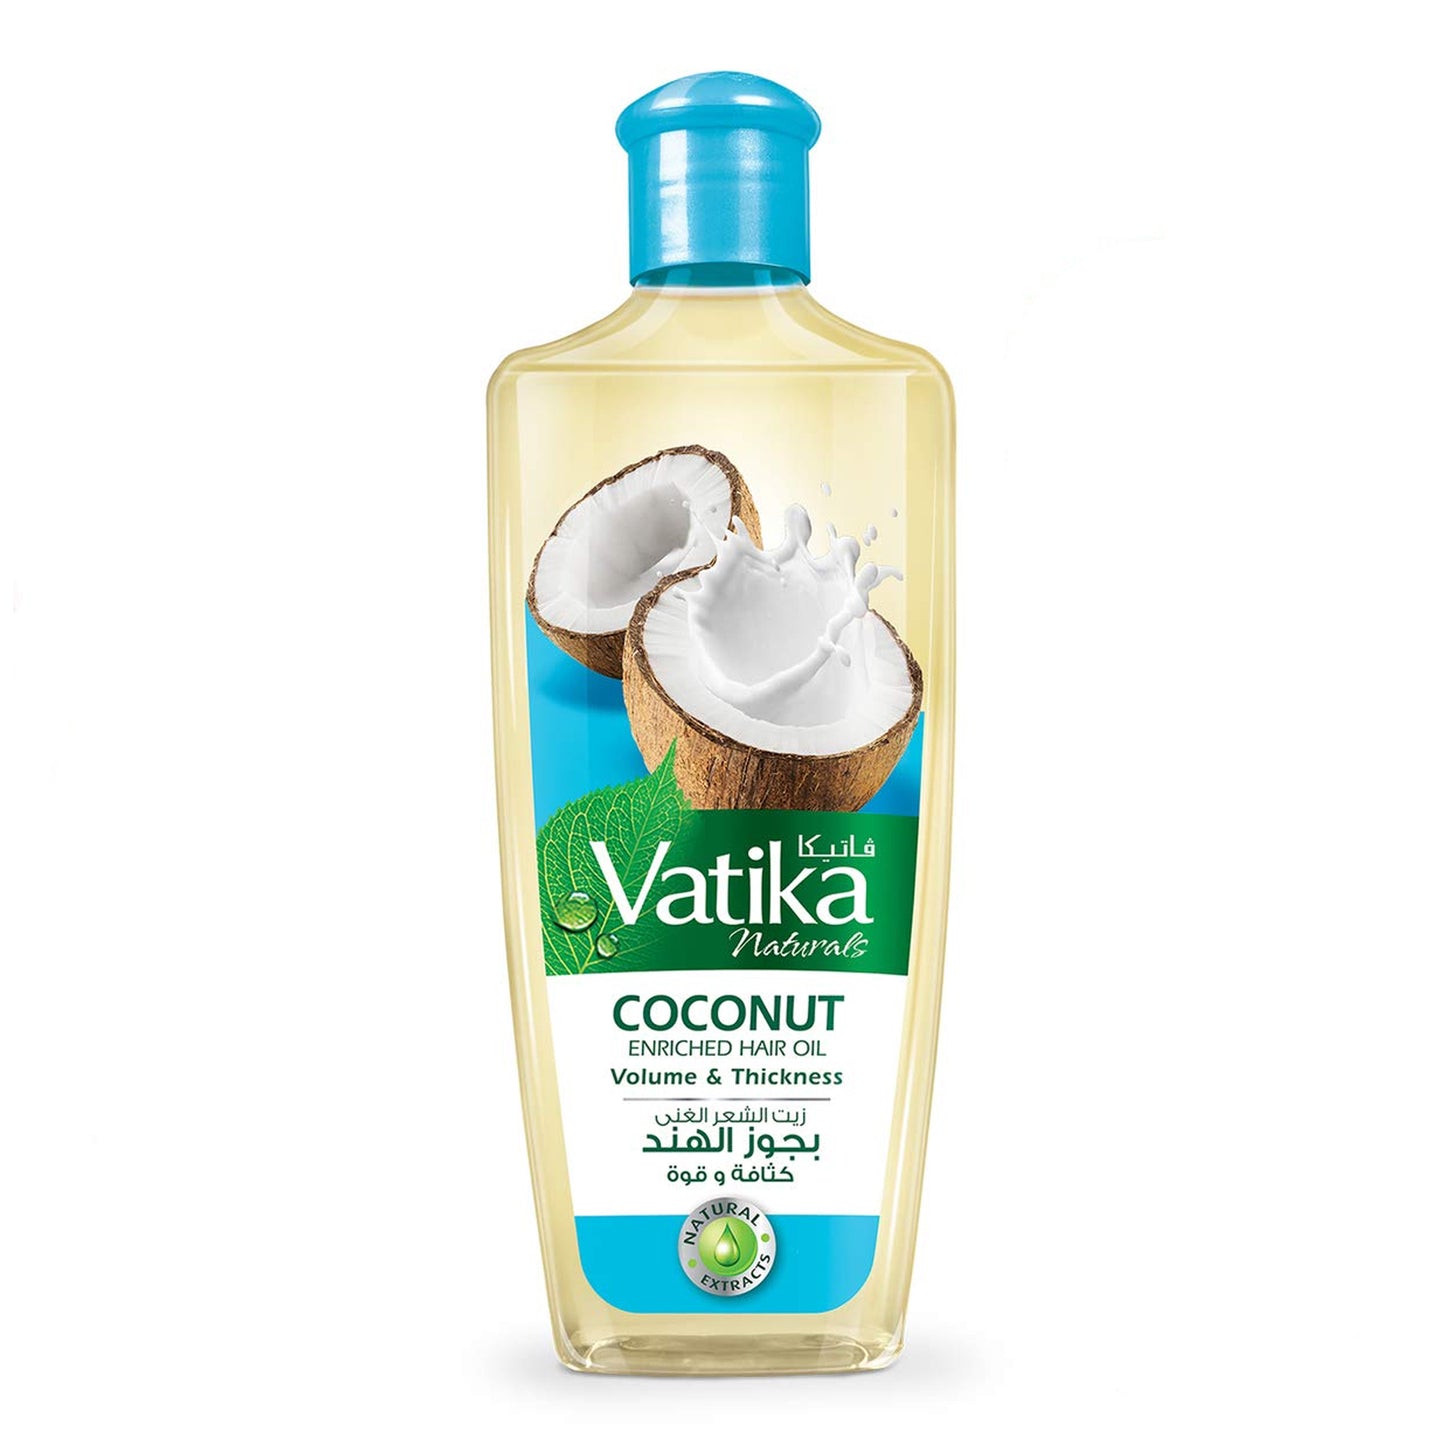 VATIKA - COCONUT ENRICHED HAIR OIL FOR VOLUME & THICKNESS - 200ML